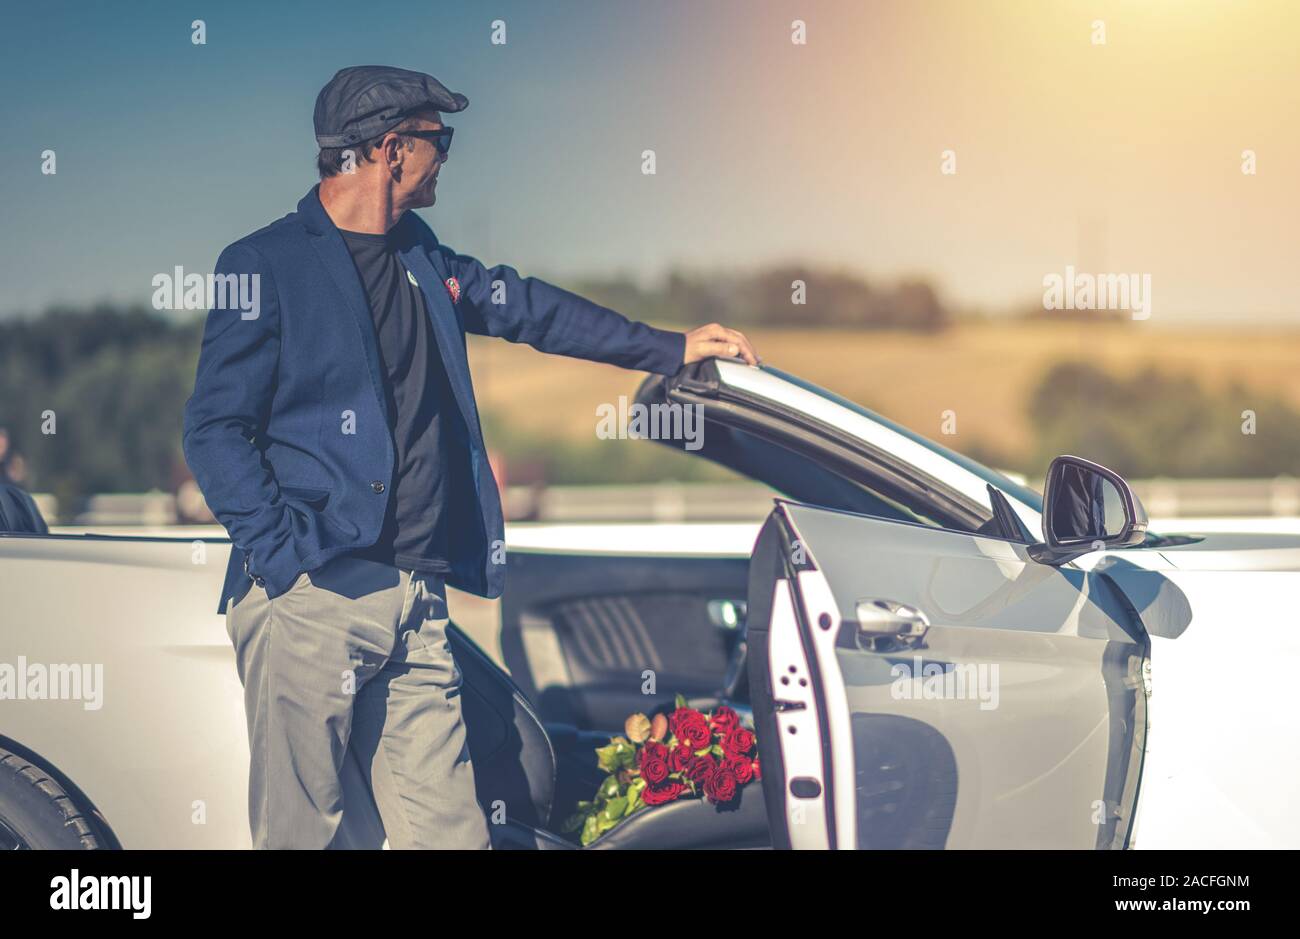 Elegant Romantic Men in His 60s Go on a Date with Red Roses Bouquet Inside His Convertible Car. Stock Photo